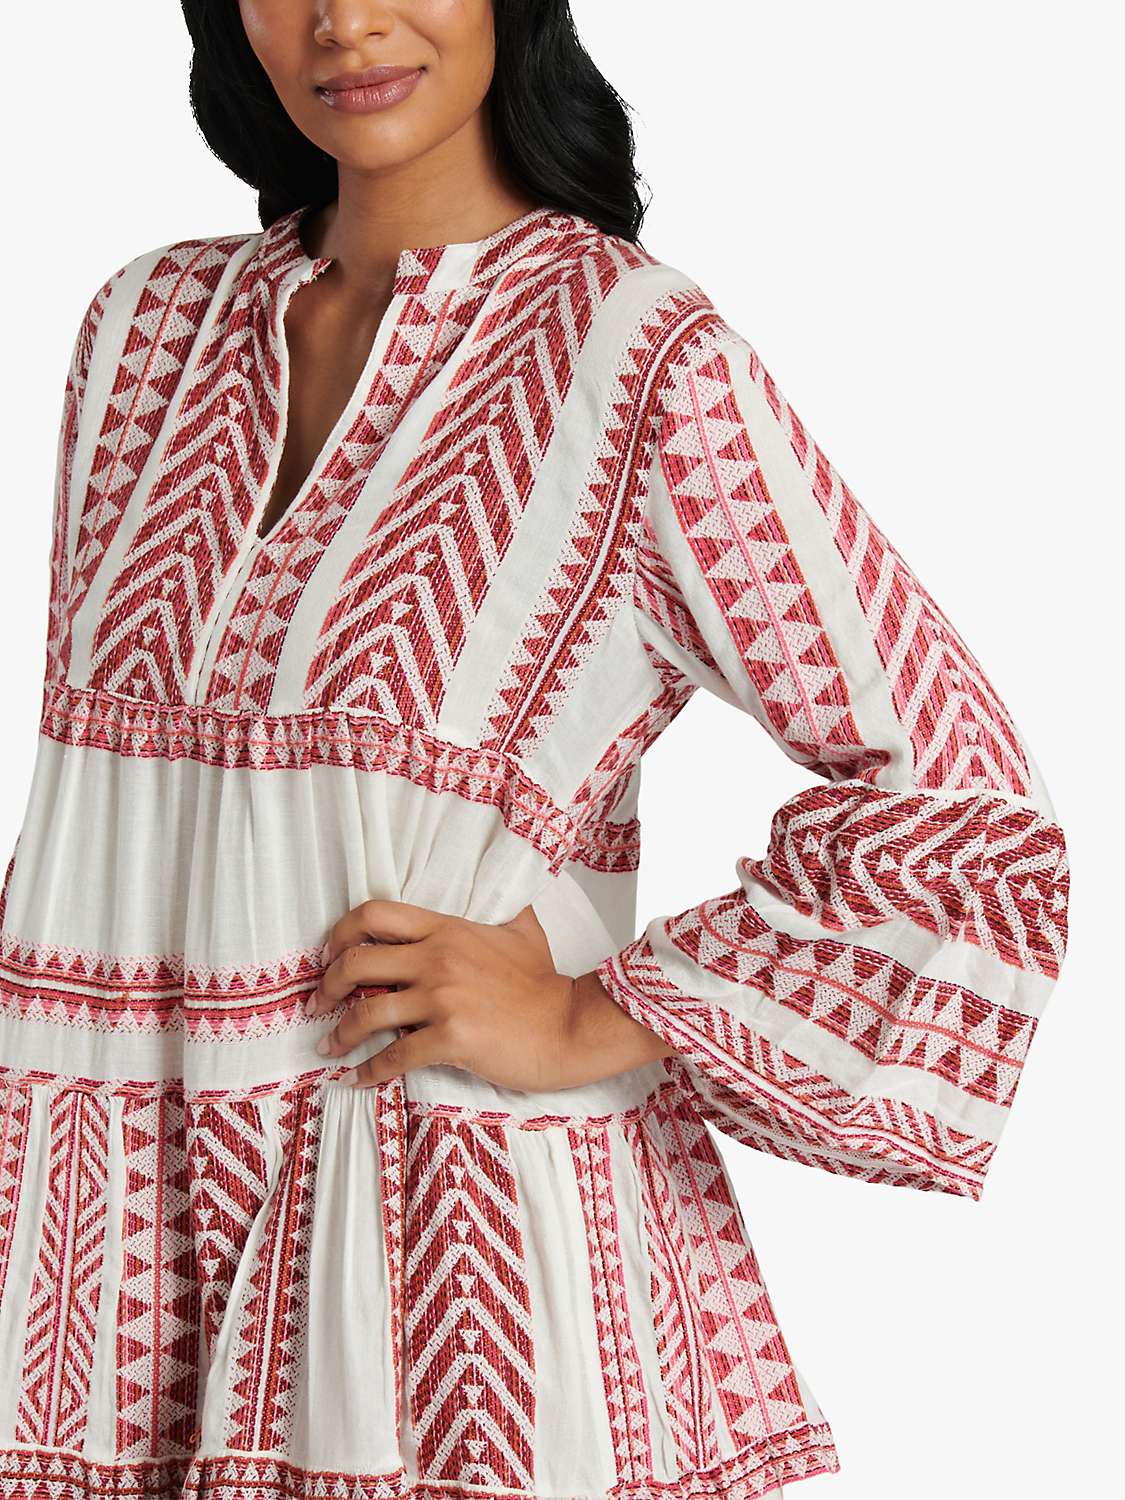 Buy South Beach Jacquard Tiered Mini Dress Online at johnlewis.com